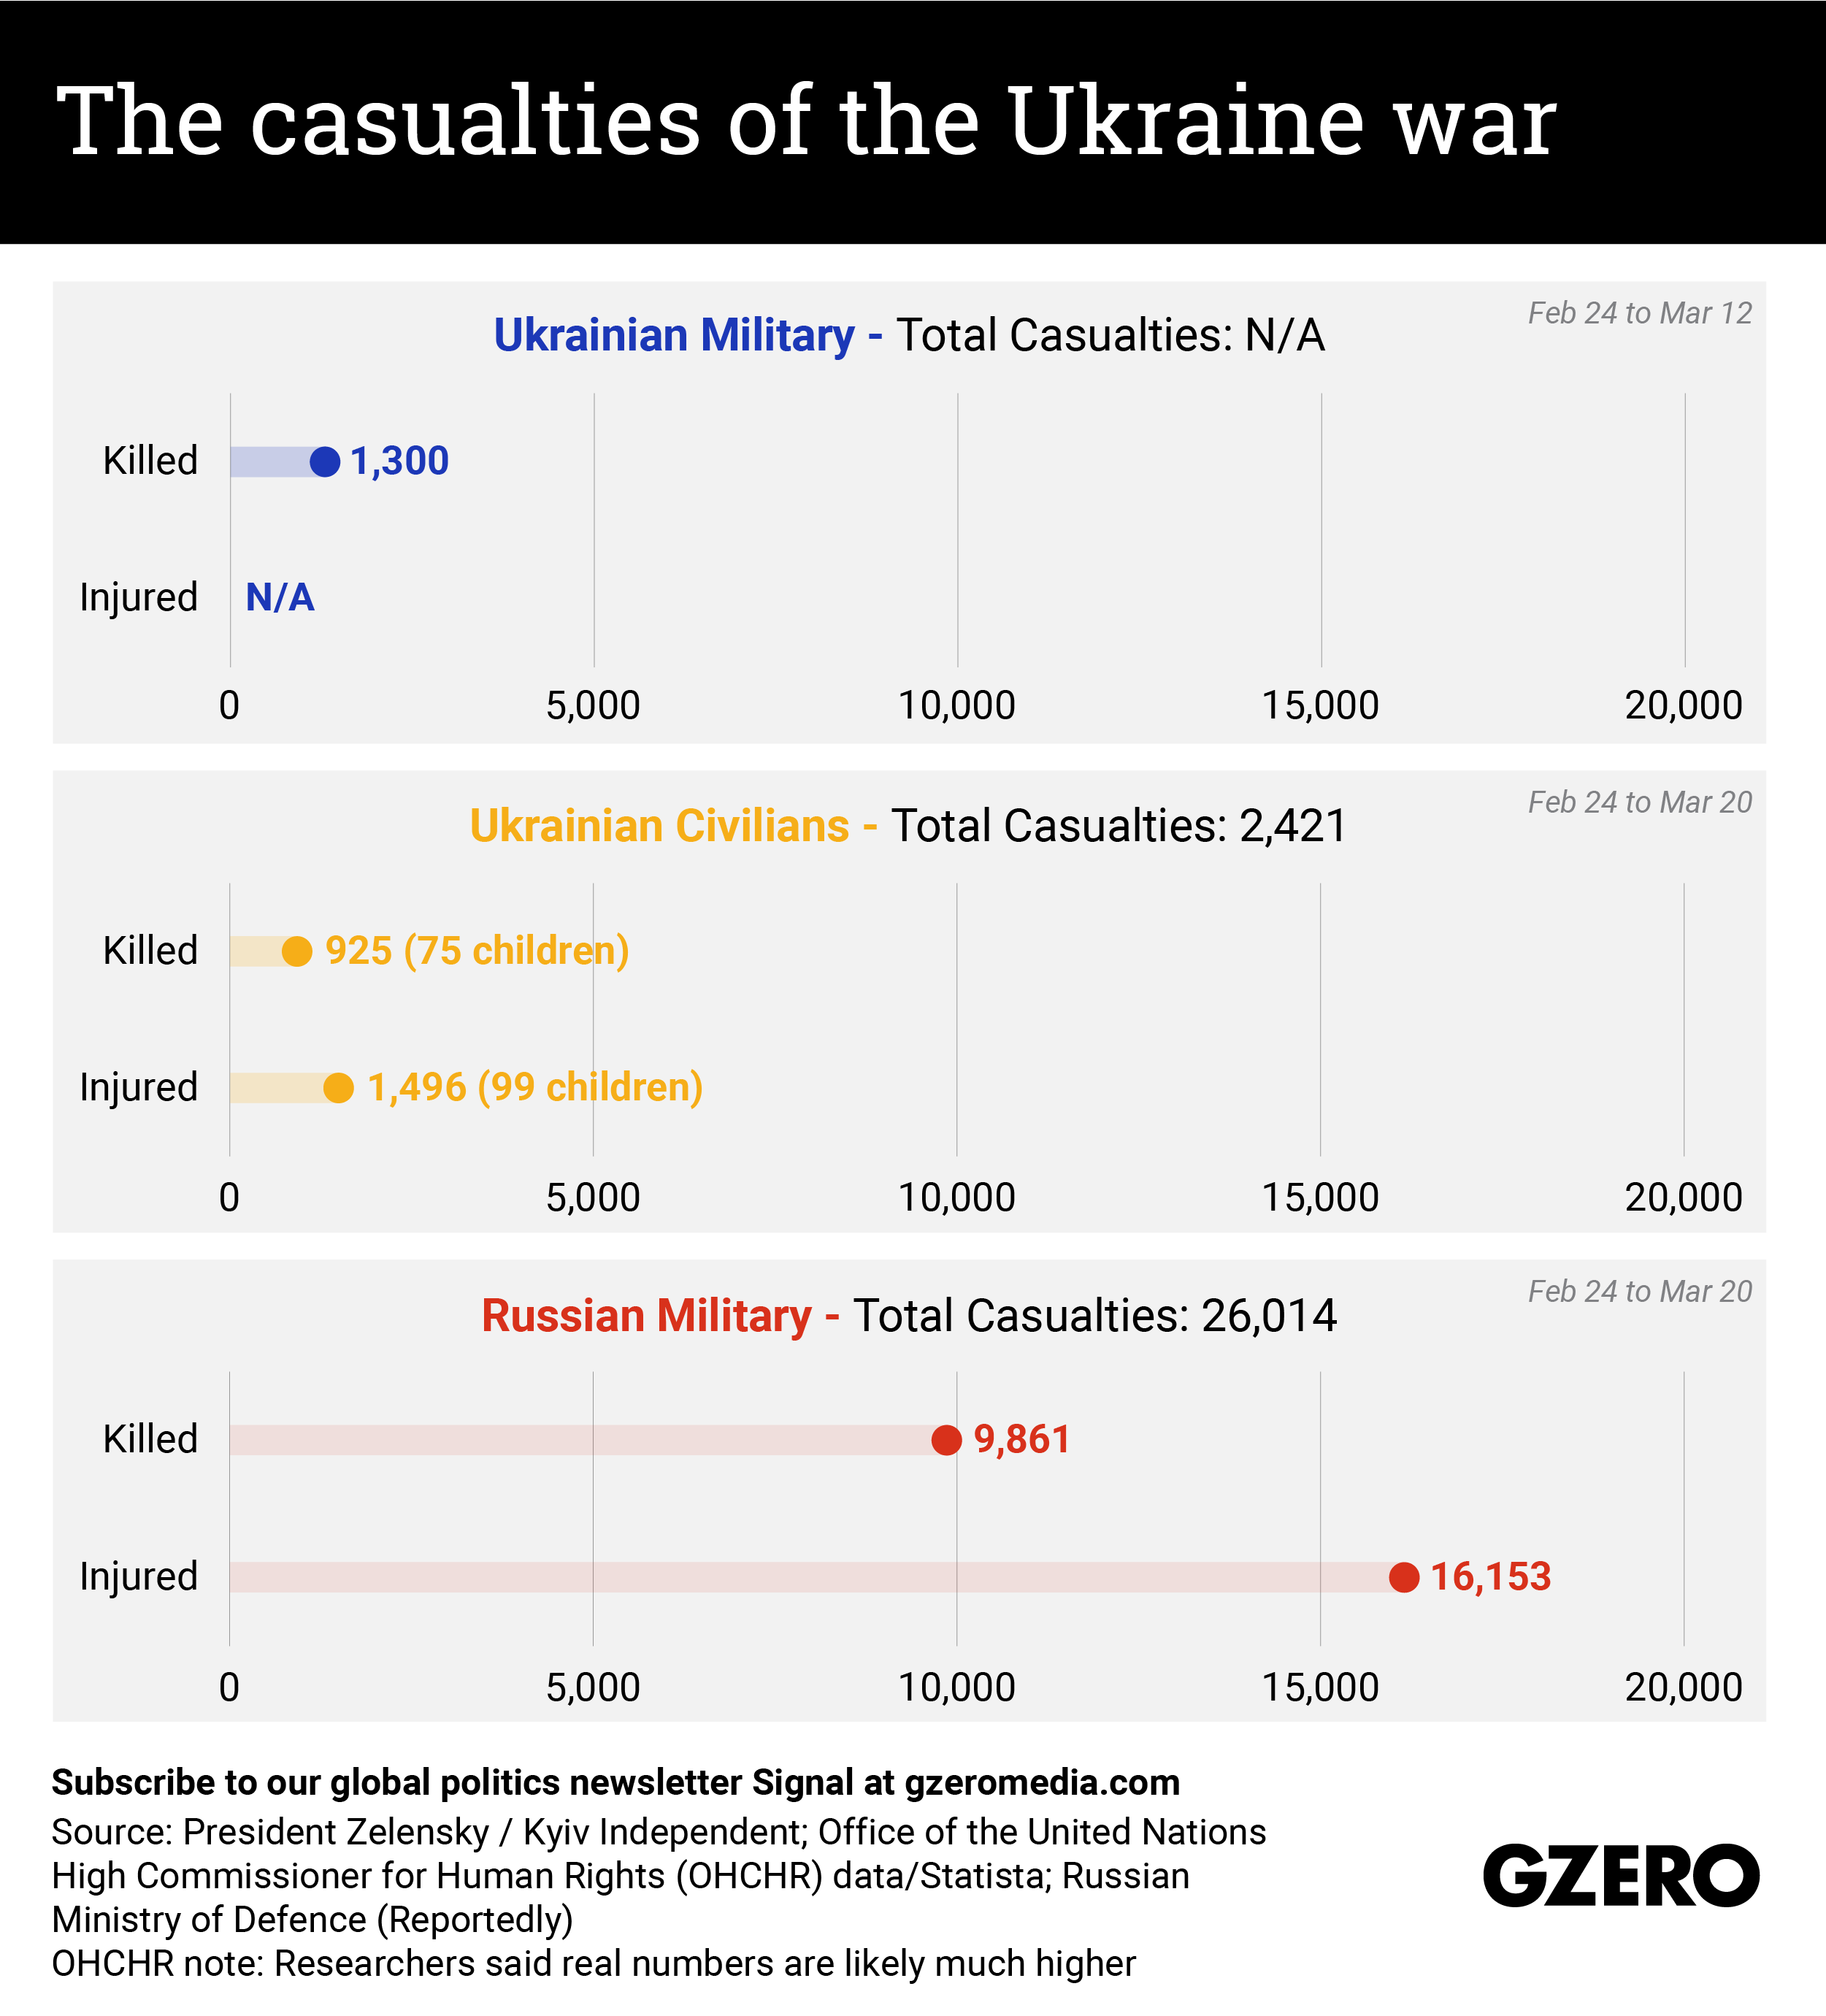 The Graphic Truth: The casualties of the Ukraine war